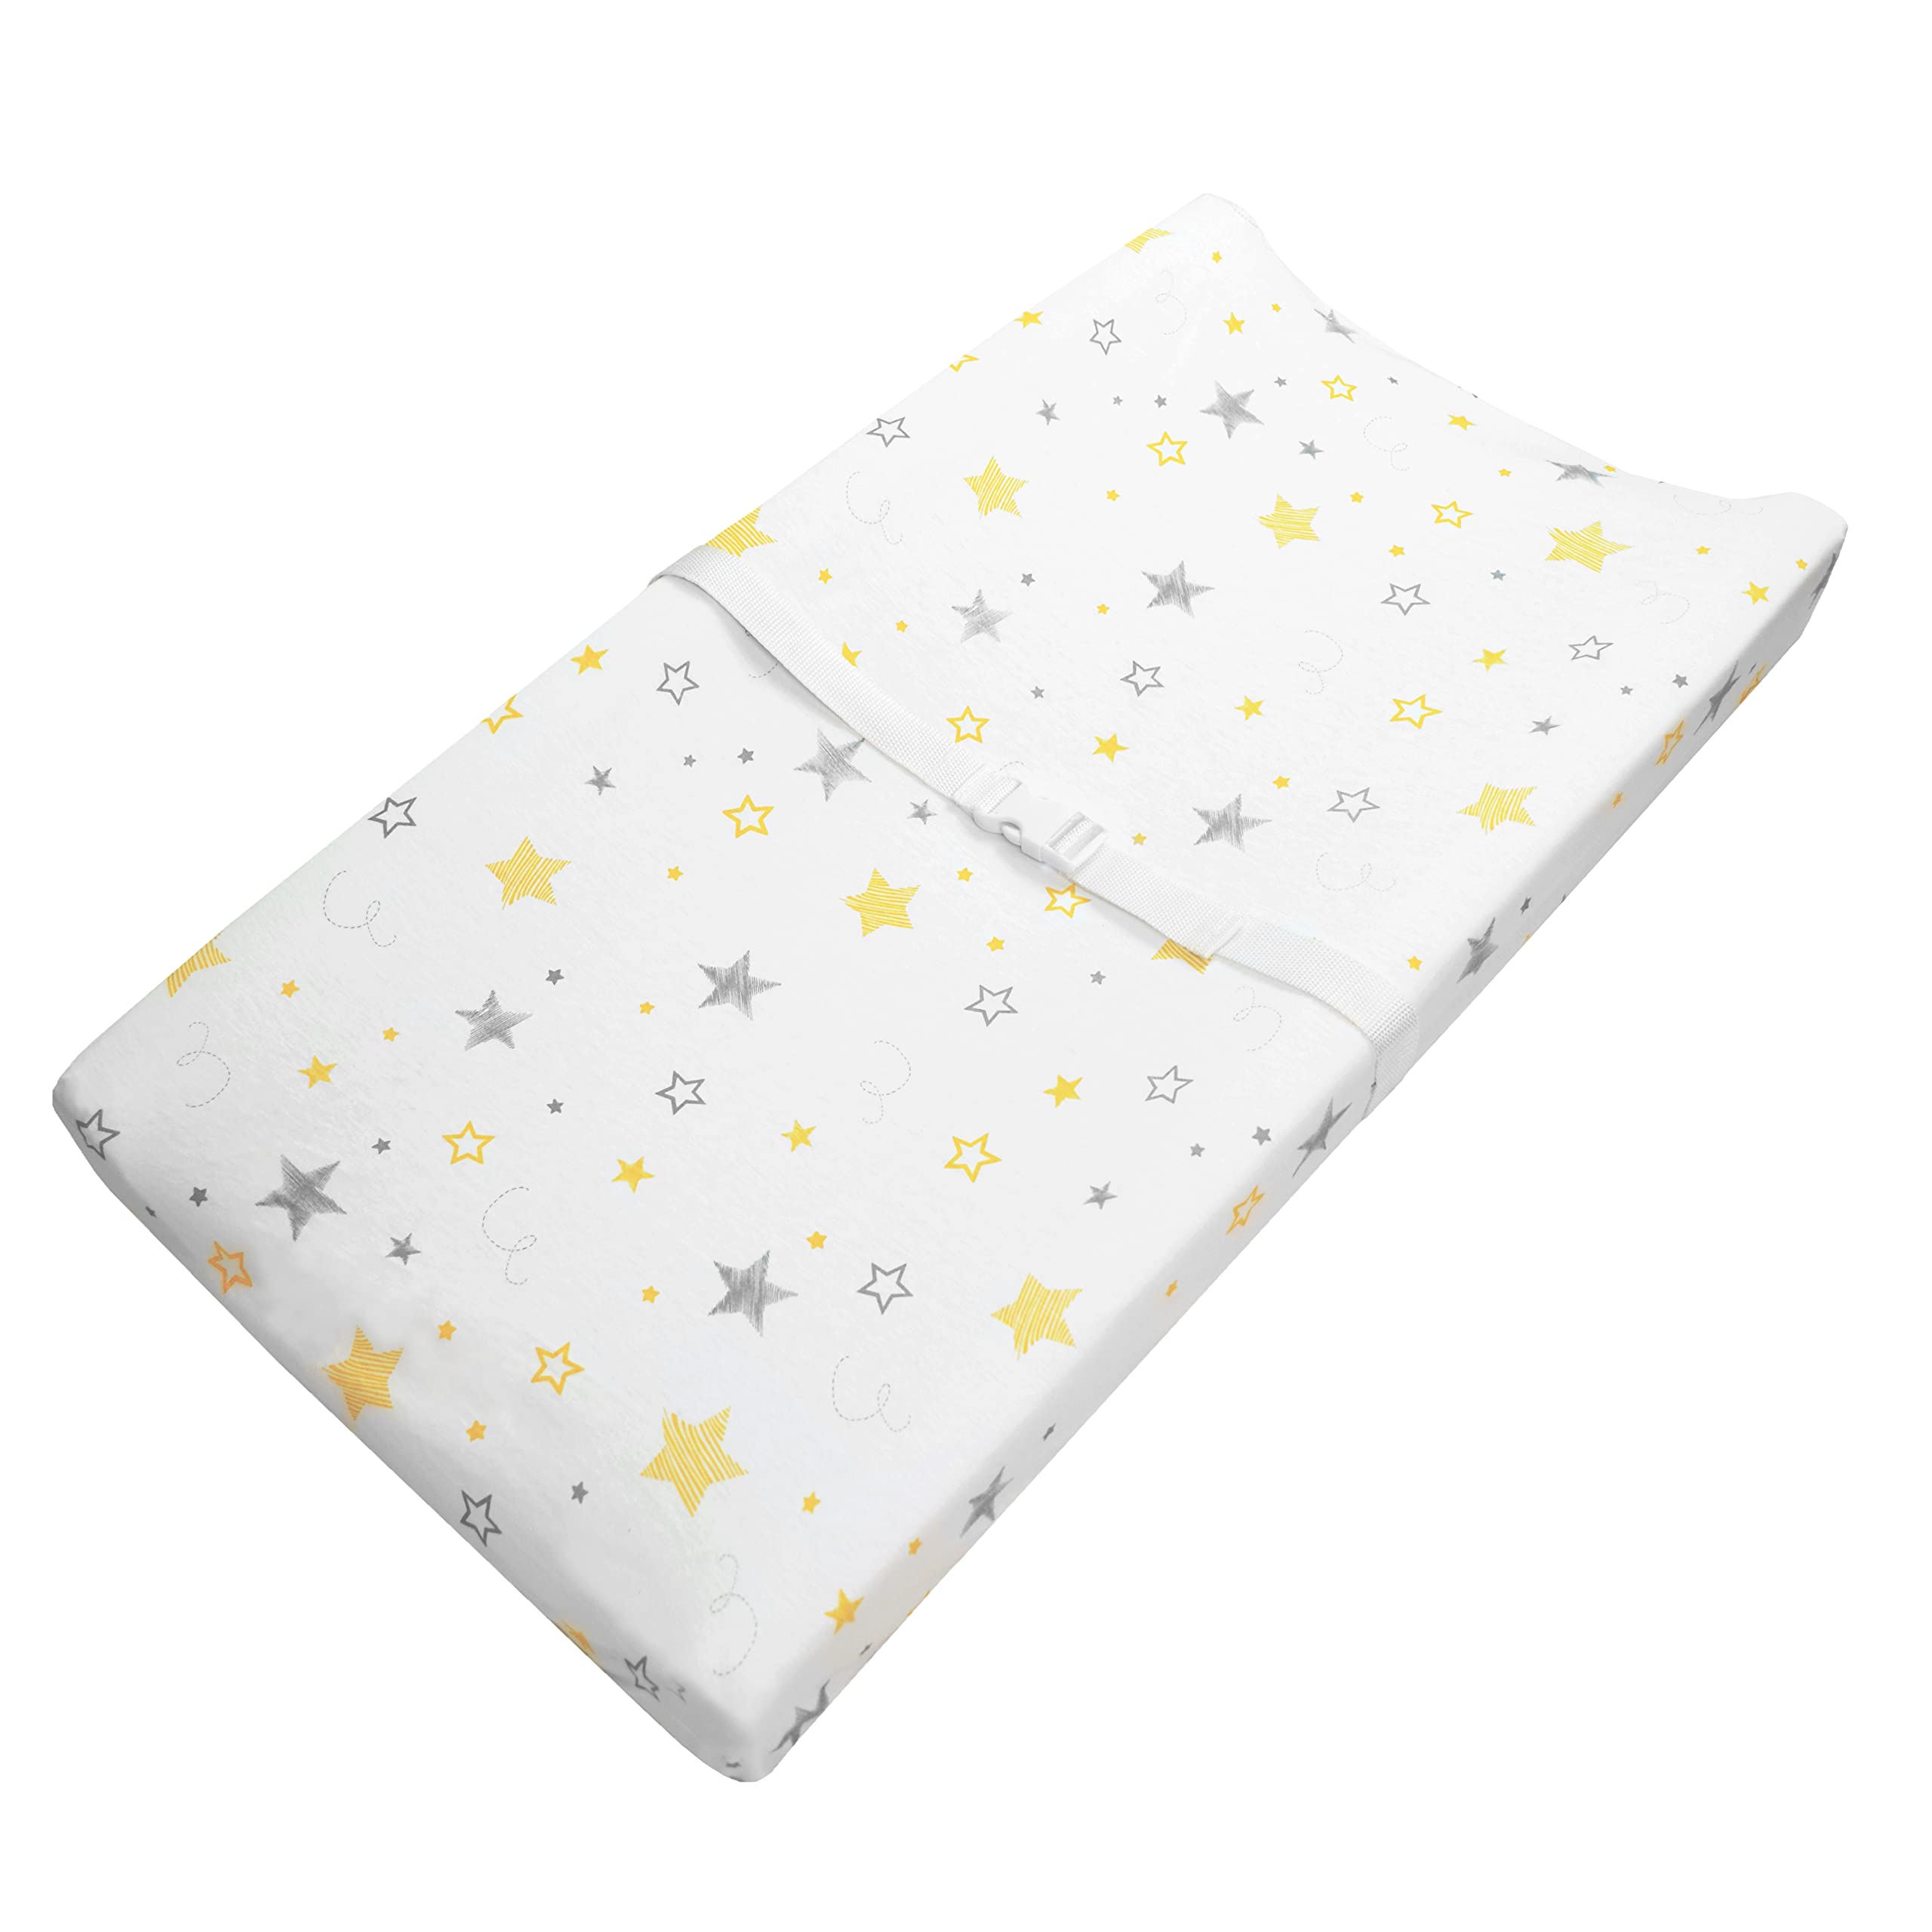 American Baby Company 2 Pack Printed 100% Cotton Knit Fitted Contoured Changing Table Pad Cover - Compatible with Mika Micky Bassinet, Golden Yellow Stars/Super Stars, for Boys and Girls